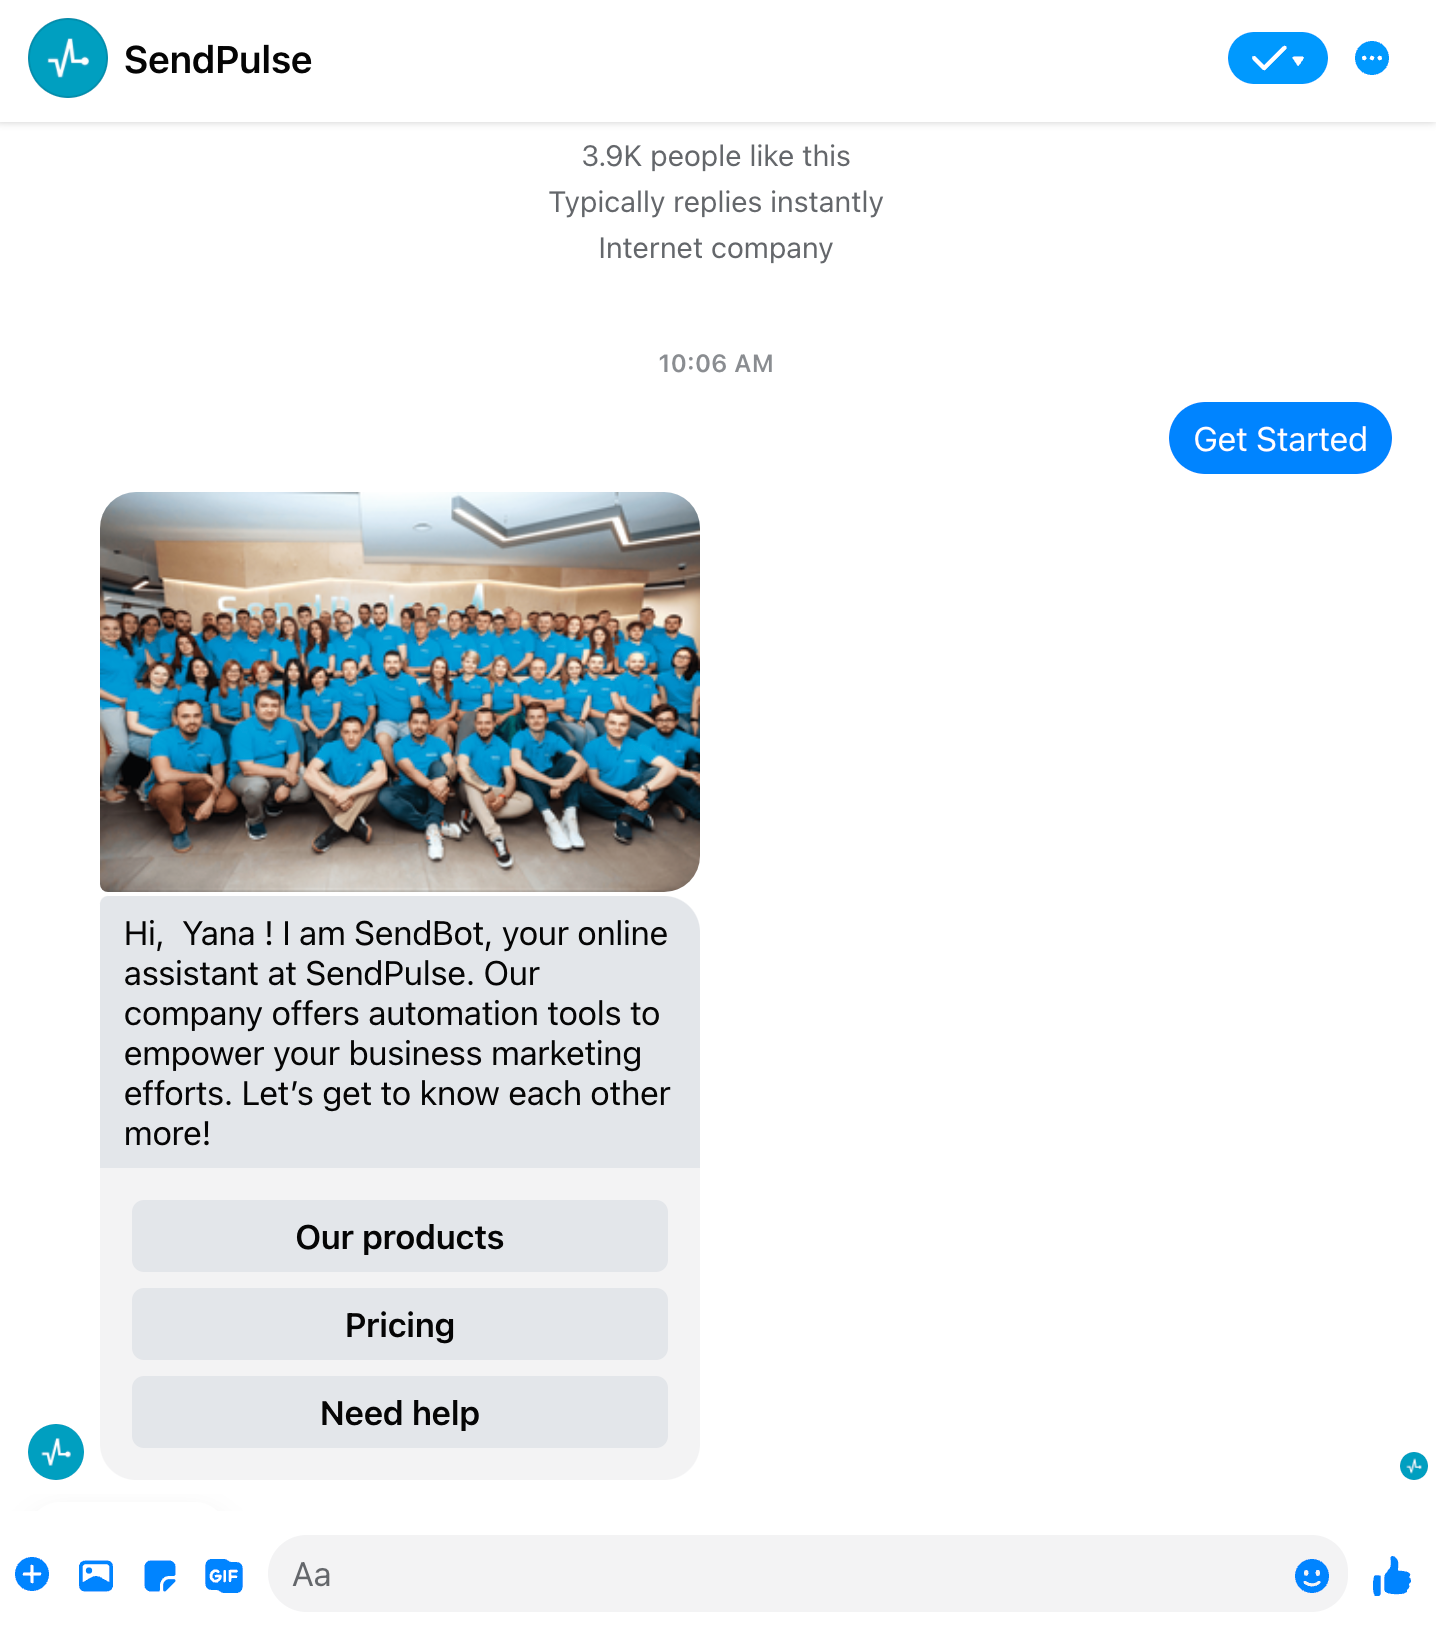 chatbot welcome message